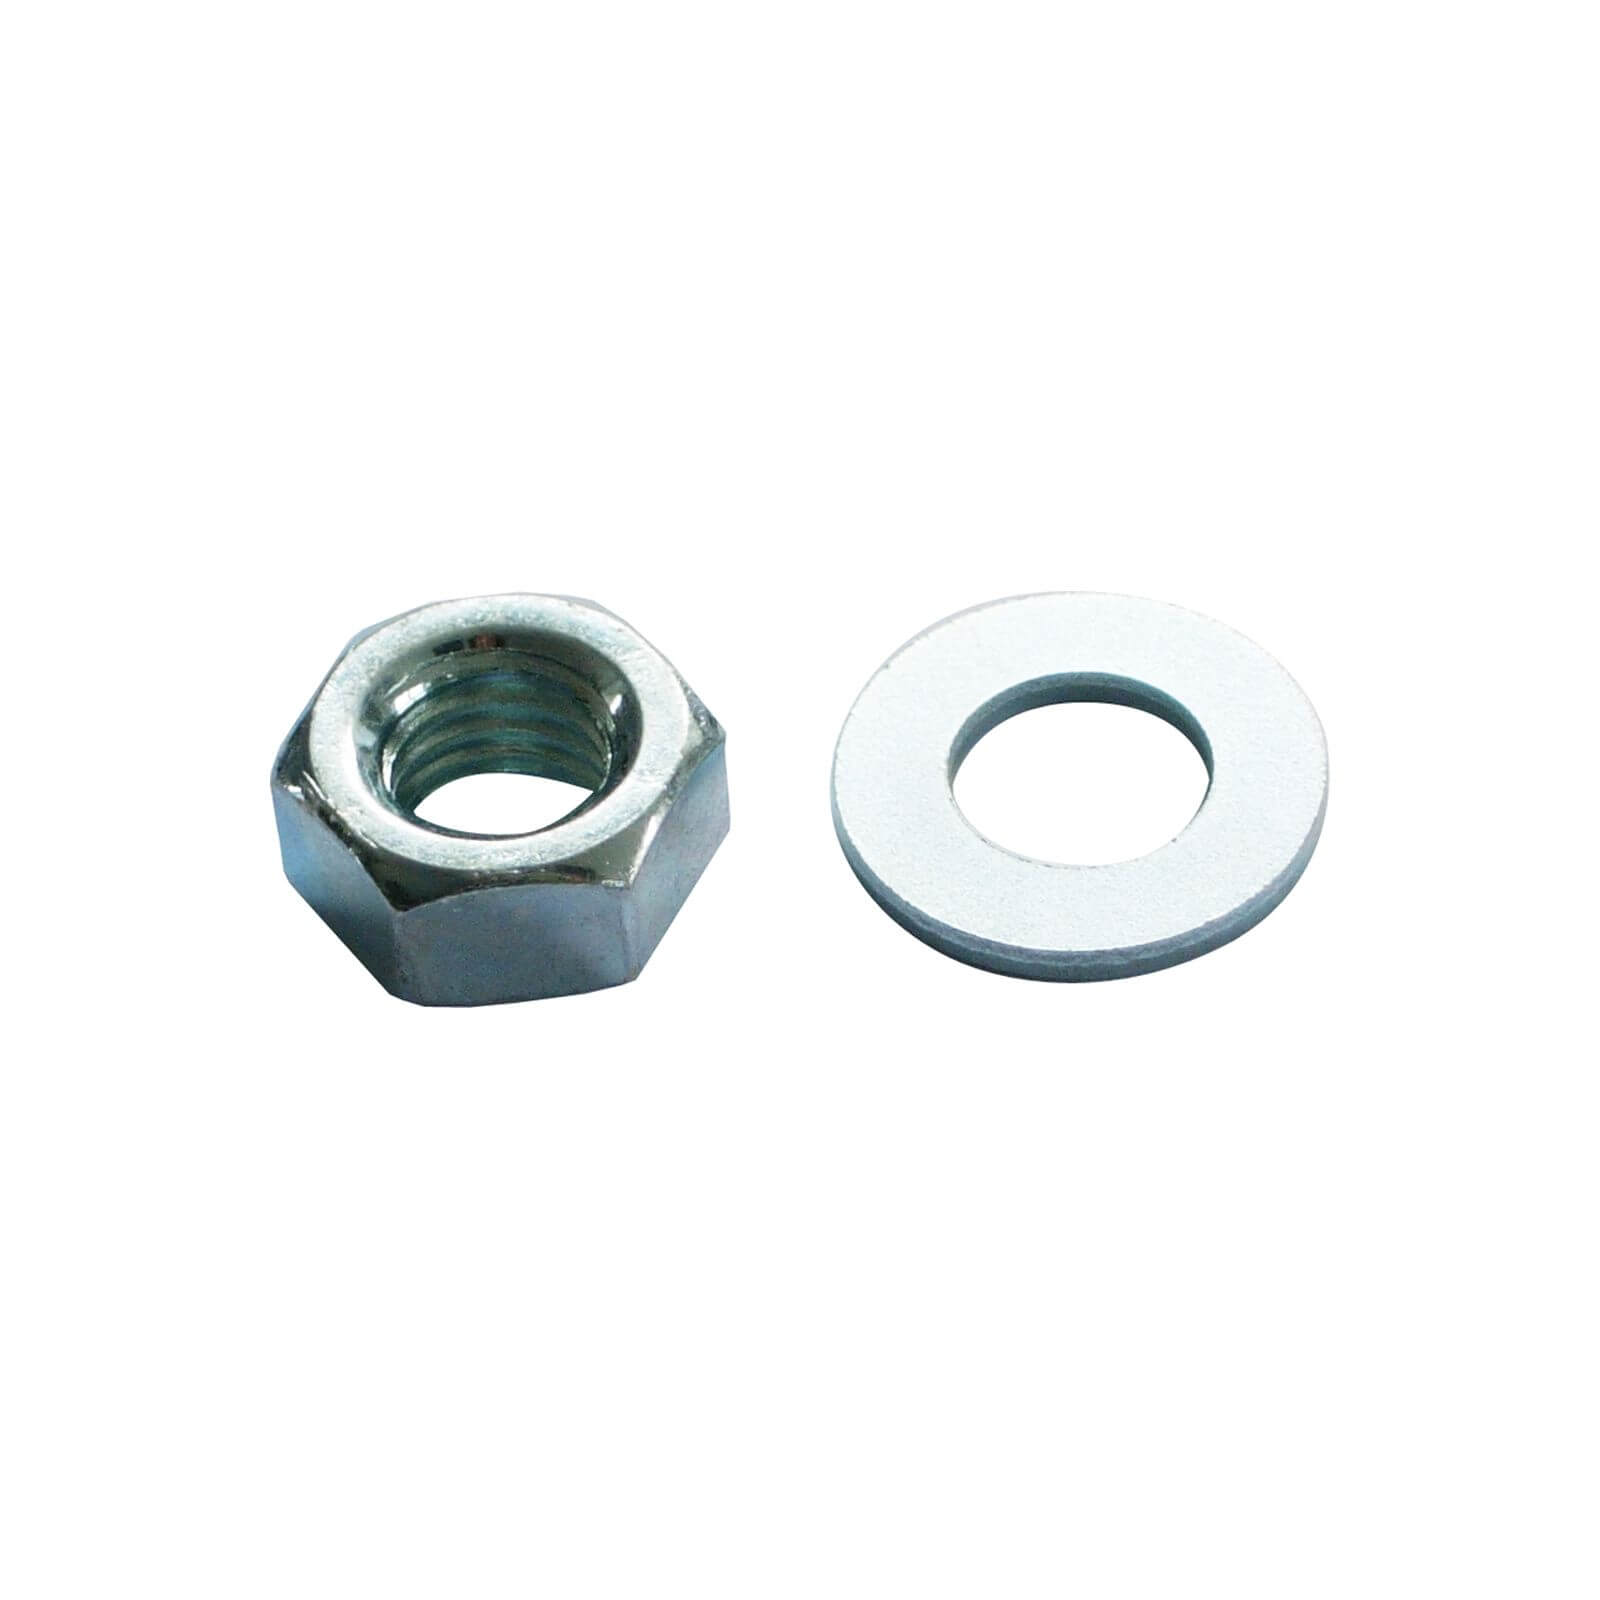 Hex Nut & Washer - Bright Zinc Plated - M10 - 5 Pack